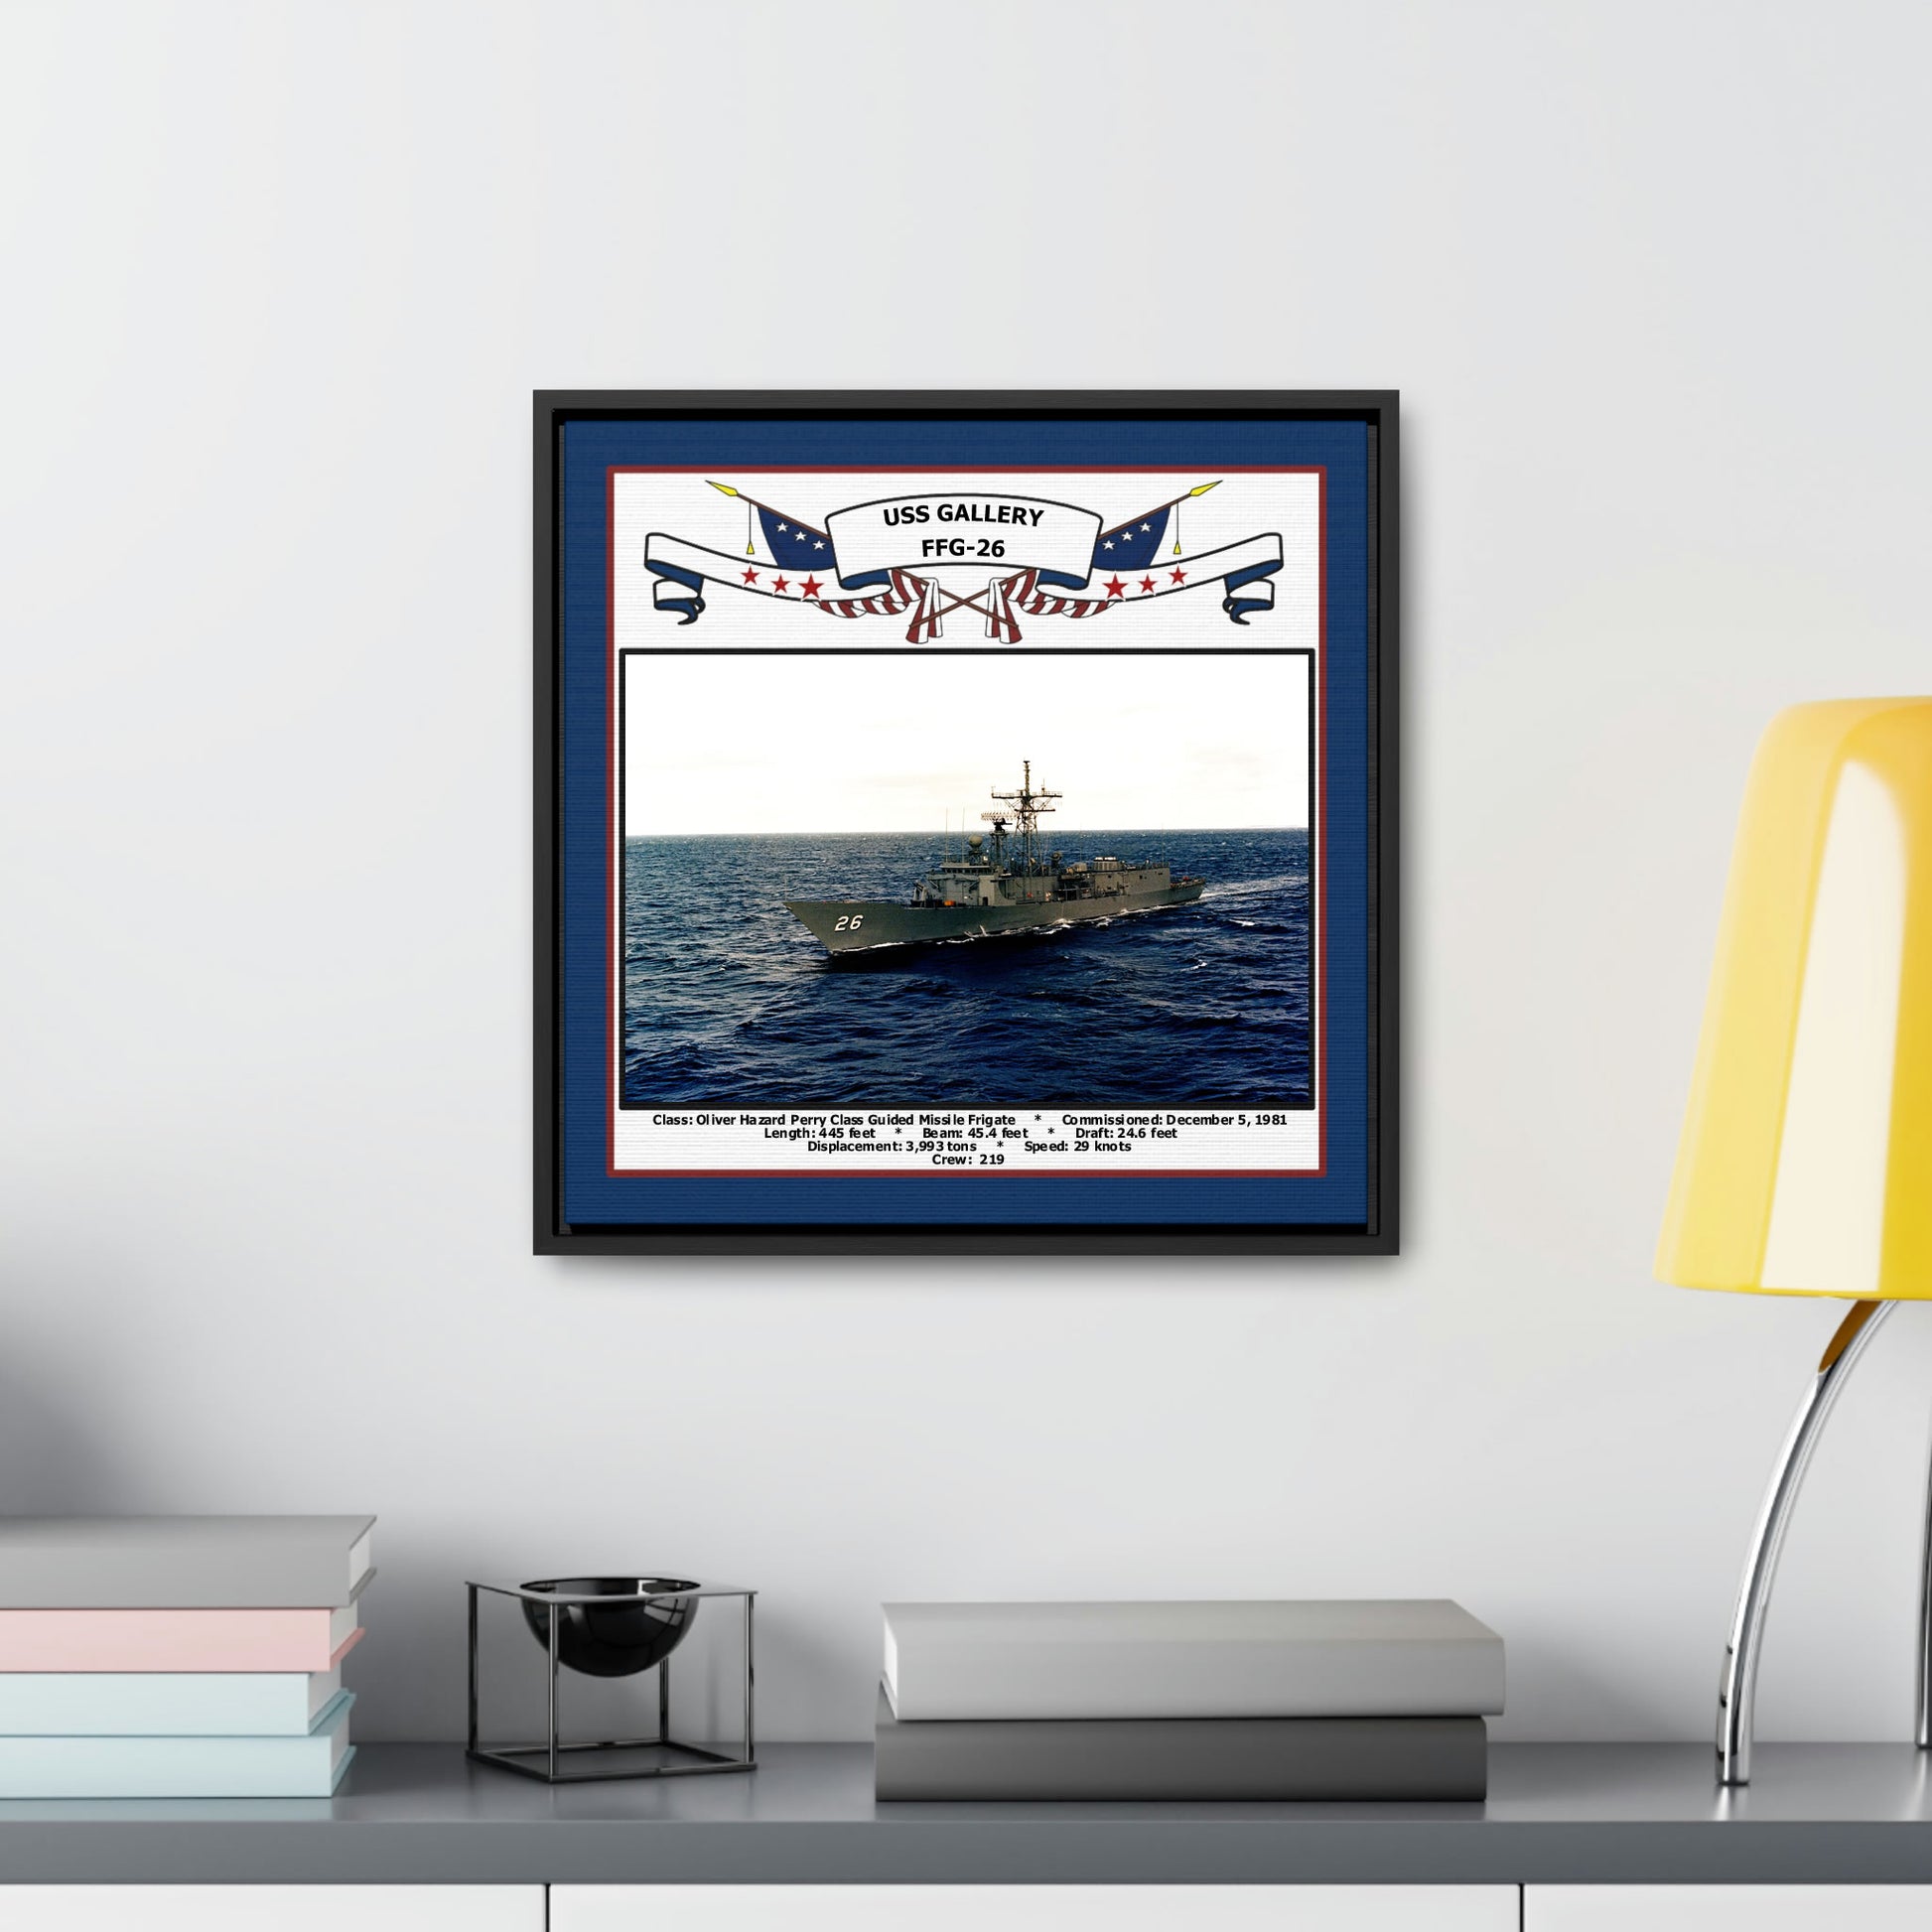 USS Gallery FFG-26 Navy Floating Frame Photo Desk View